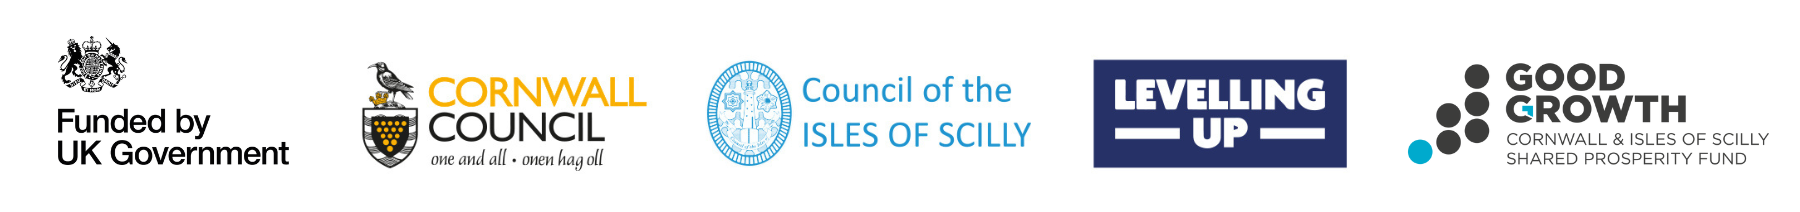 Cornwall & Isles of Scilly Logo Collection